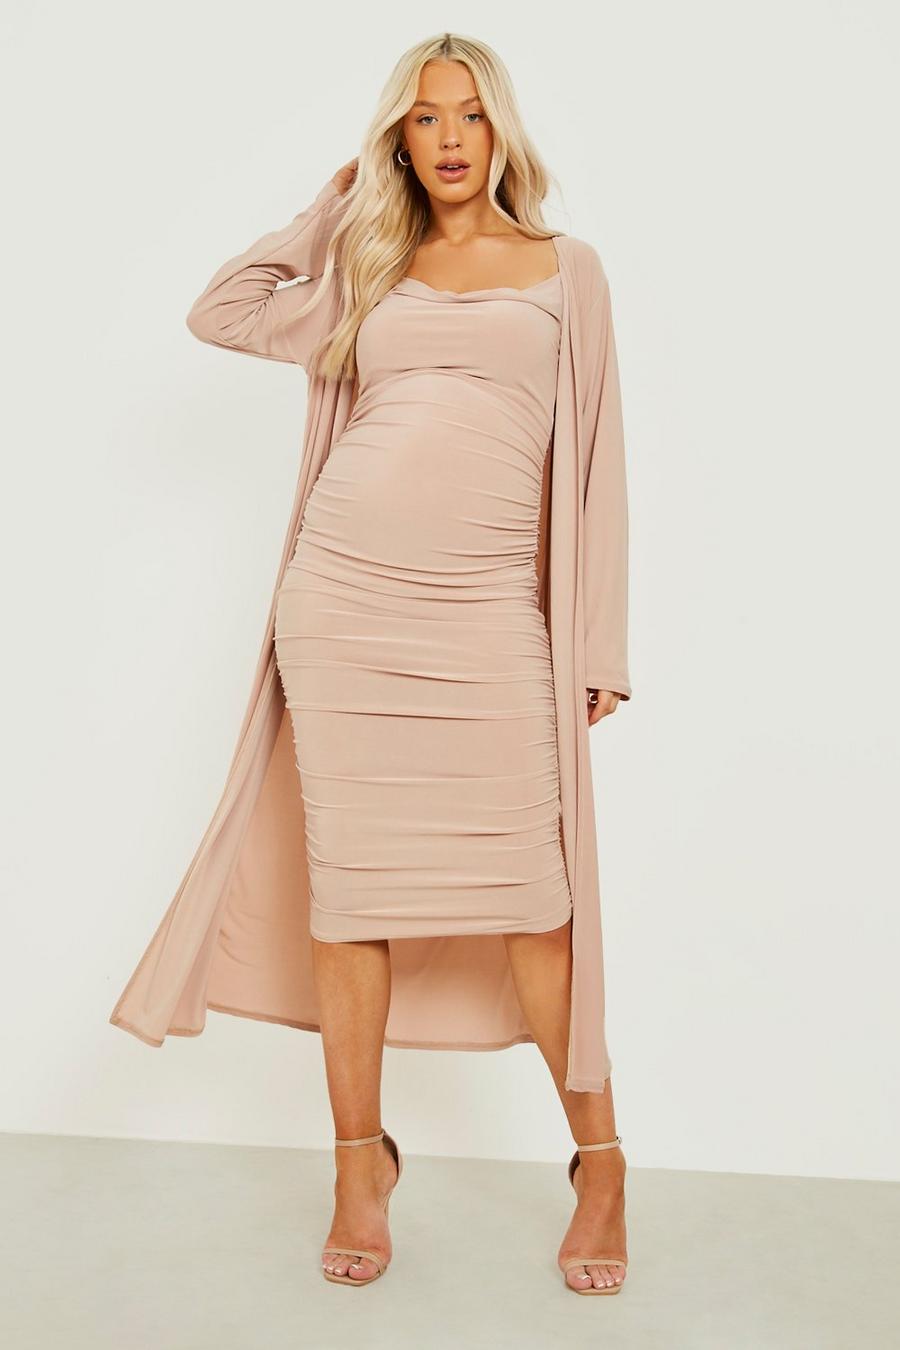 Stone beige Maternity Strappy Cowl Neck Dress And Duster Coat